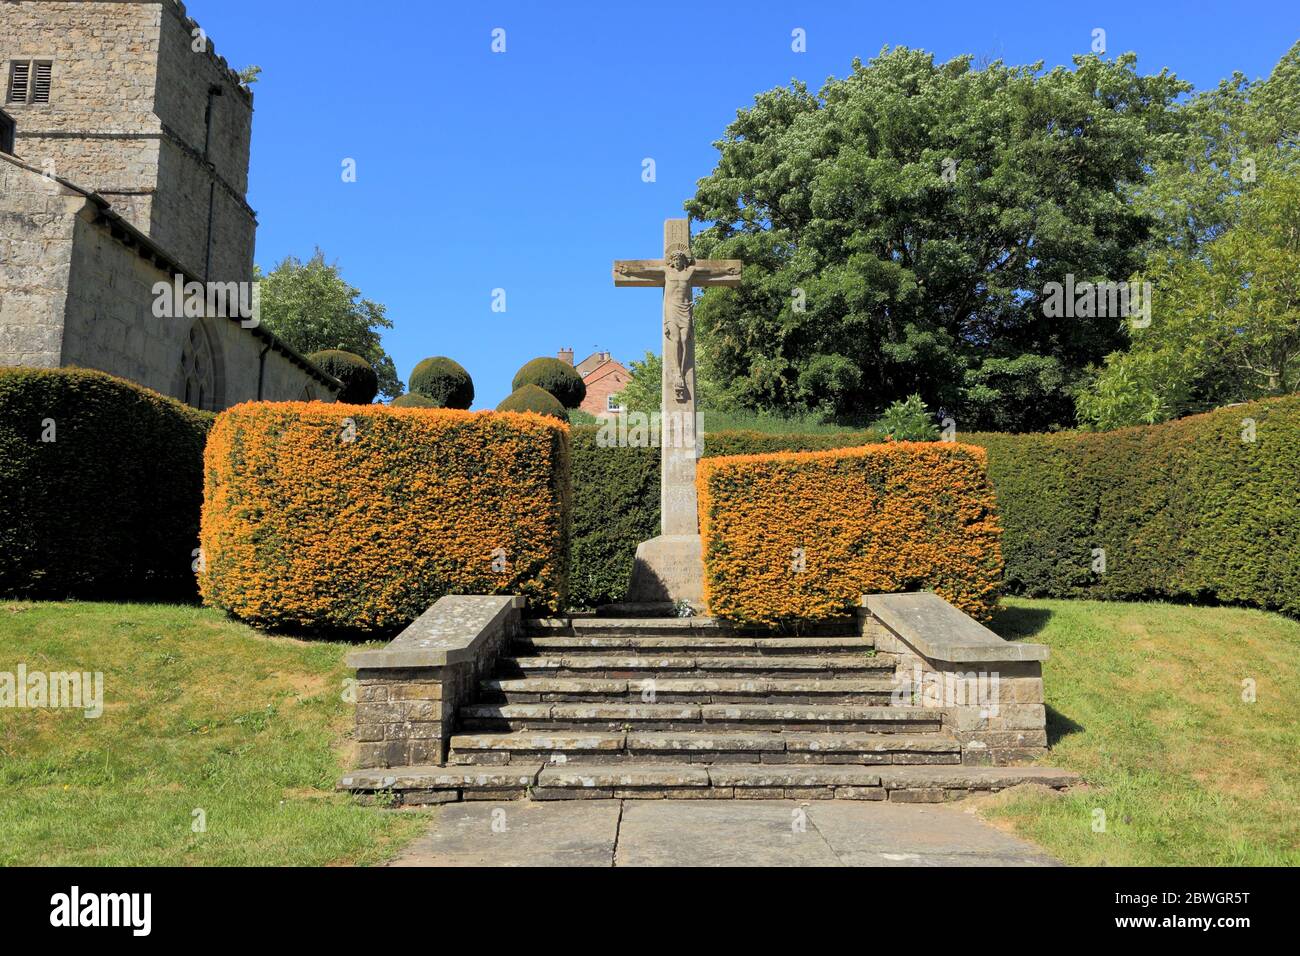 Neatly trimmed hedges around the statue of Christ on the cross in the beautiful churchyard at Kirby Underdale on the Yorkshire wolds in summertime. Stock Photo